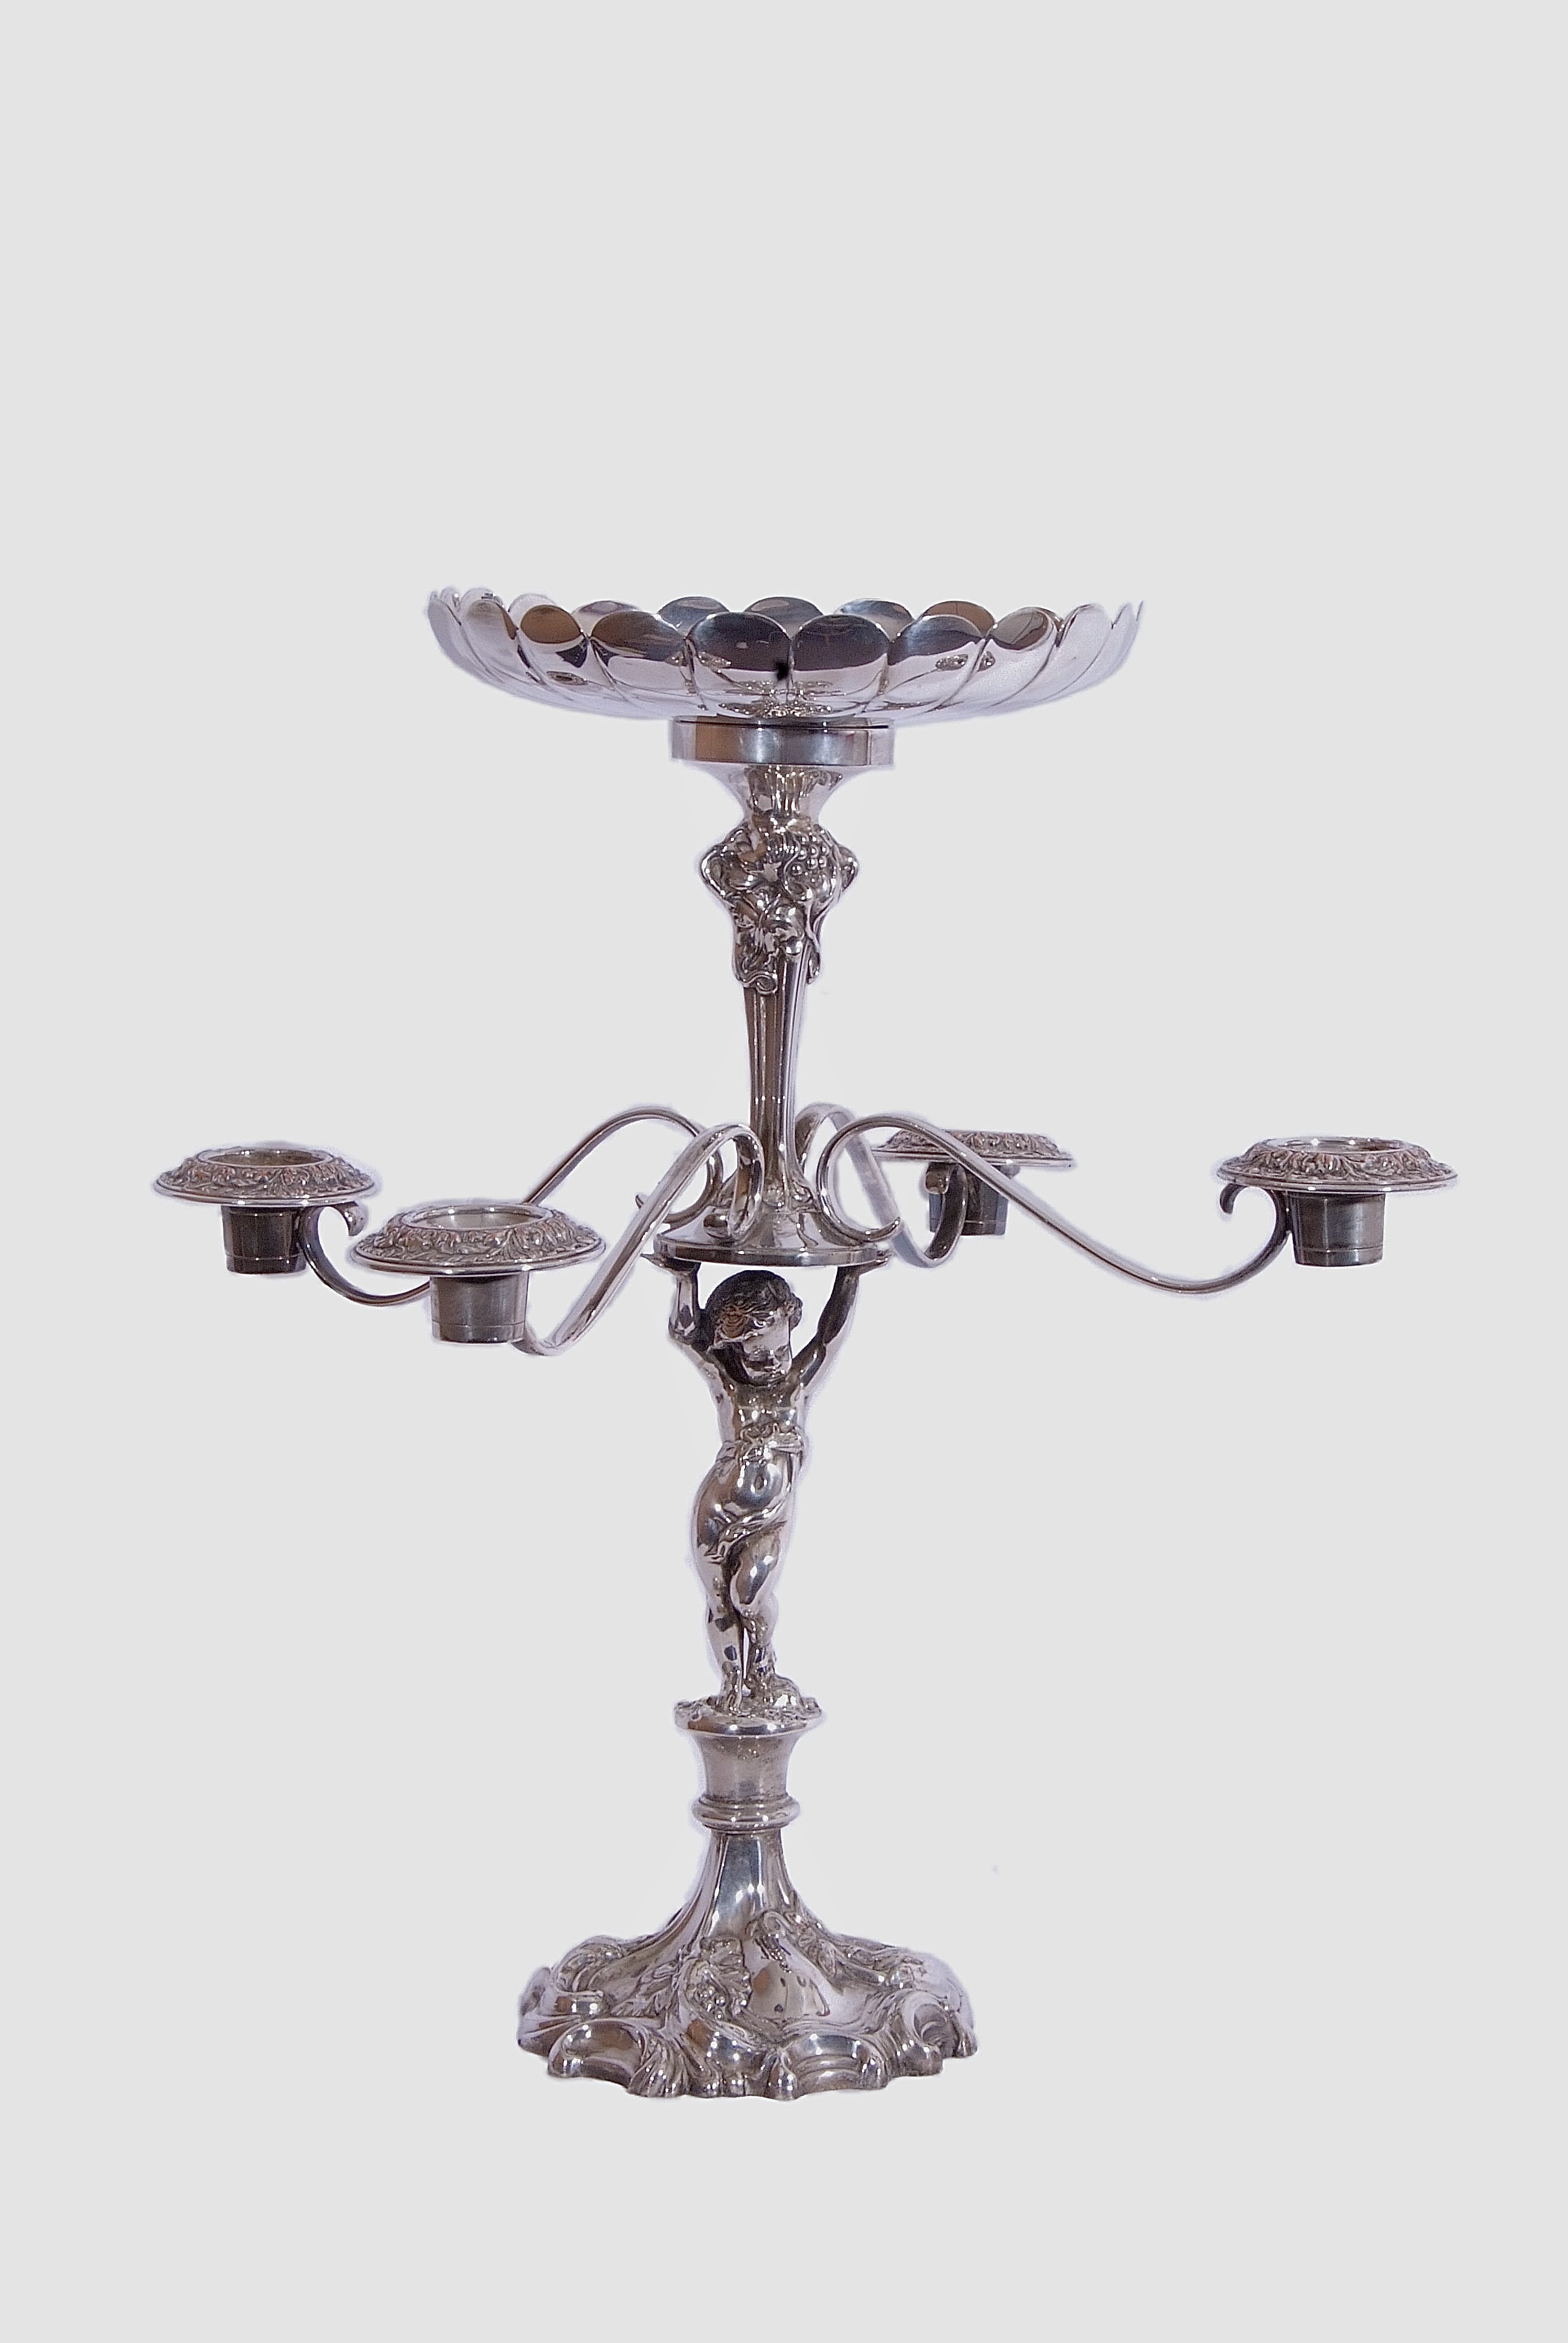 Elkington & Co silver plated centrepiece epergne/candelabrum, the top with fluted circular - Image 2 of 8